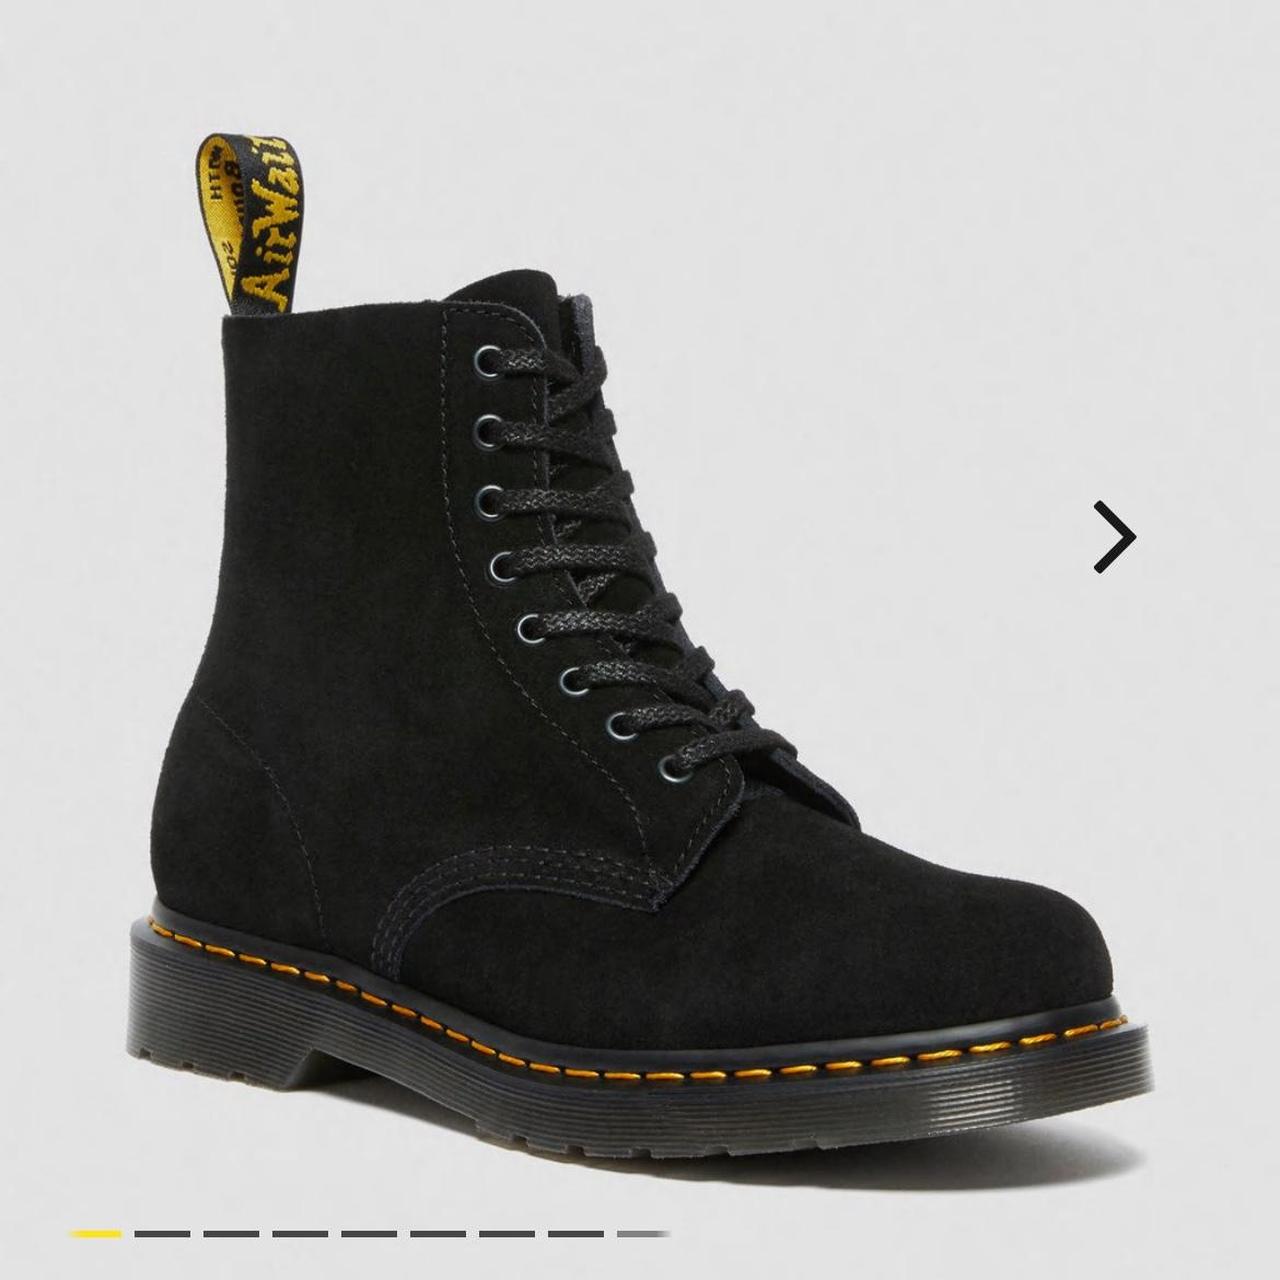 Dr Martens suede lace up boots in black. Have been... - Depop